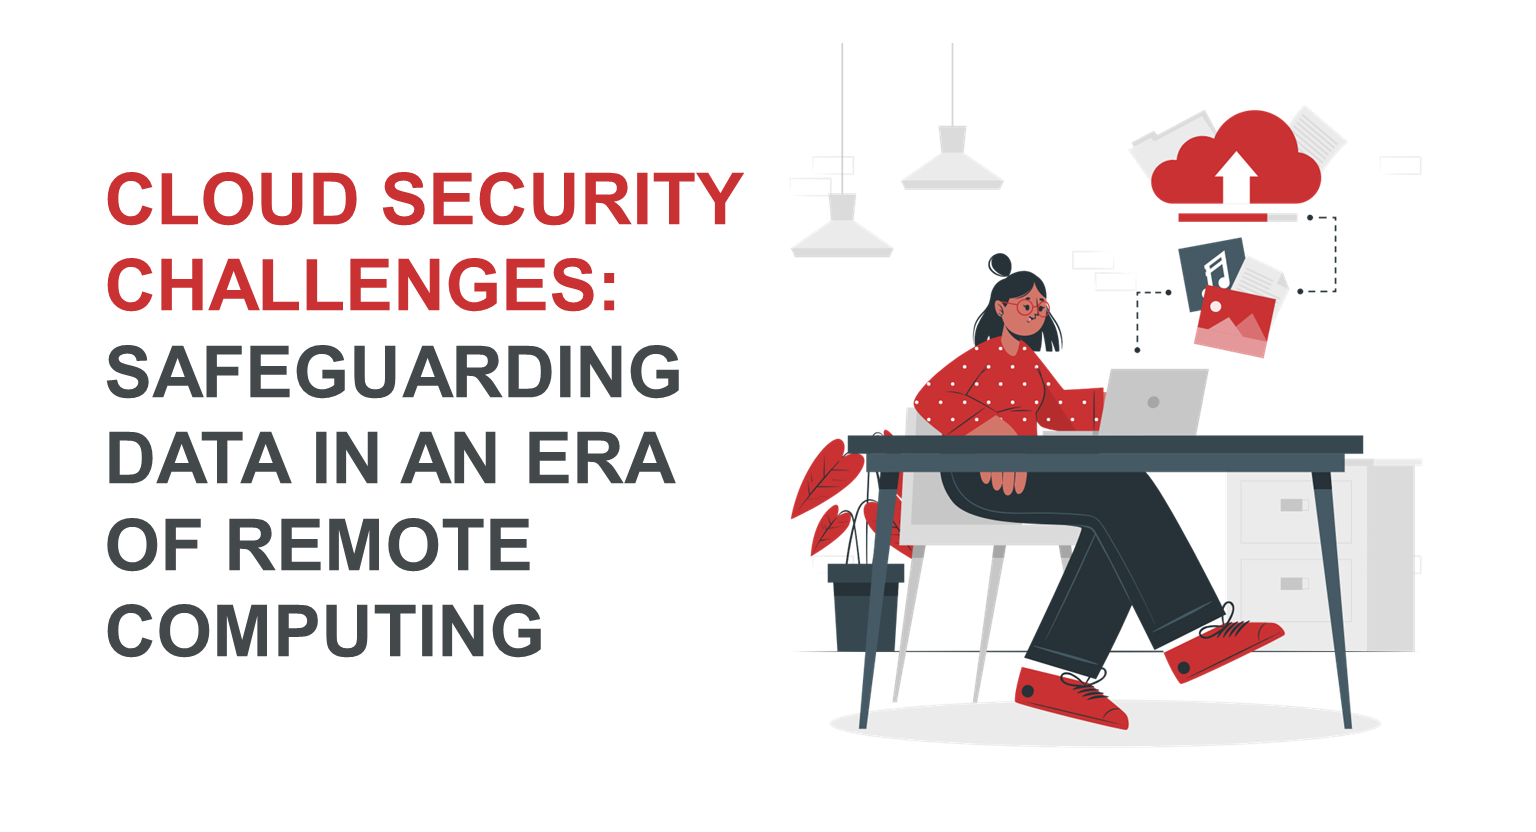 Cloud Security Challenges: Safeguarding Data in an Era of Remote Computing 